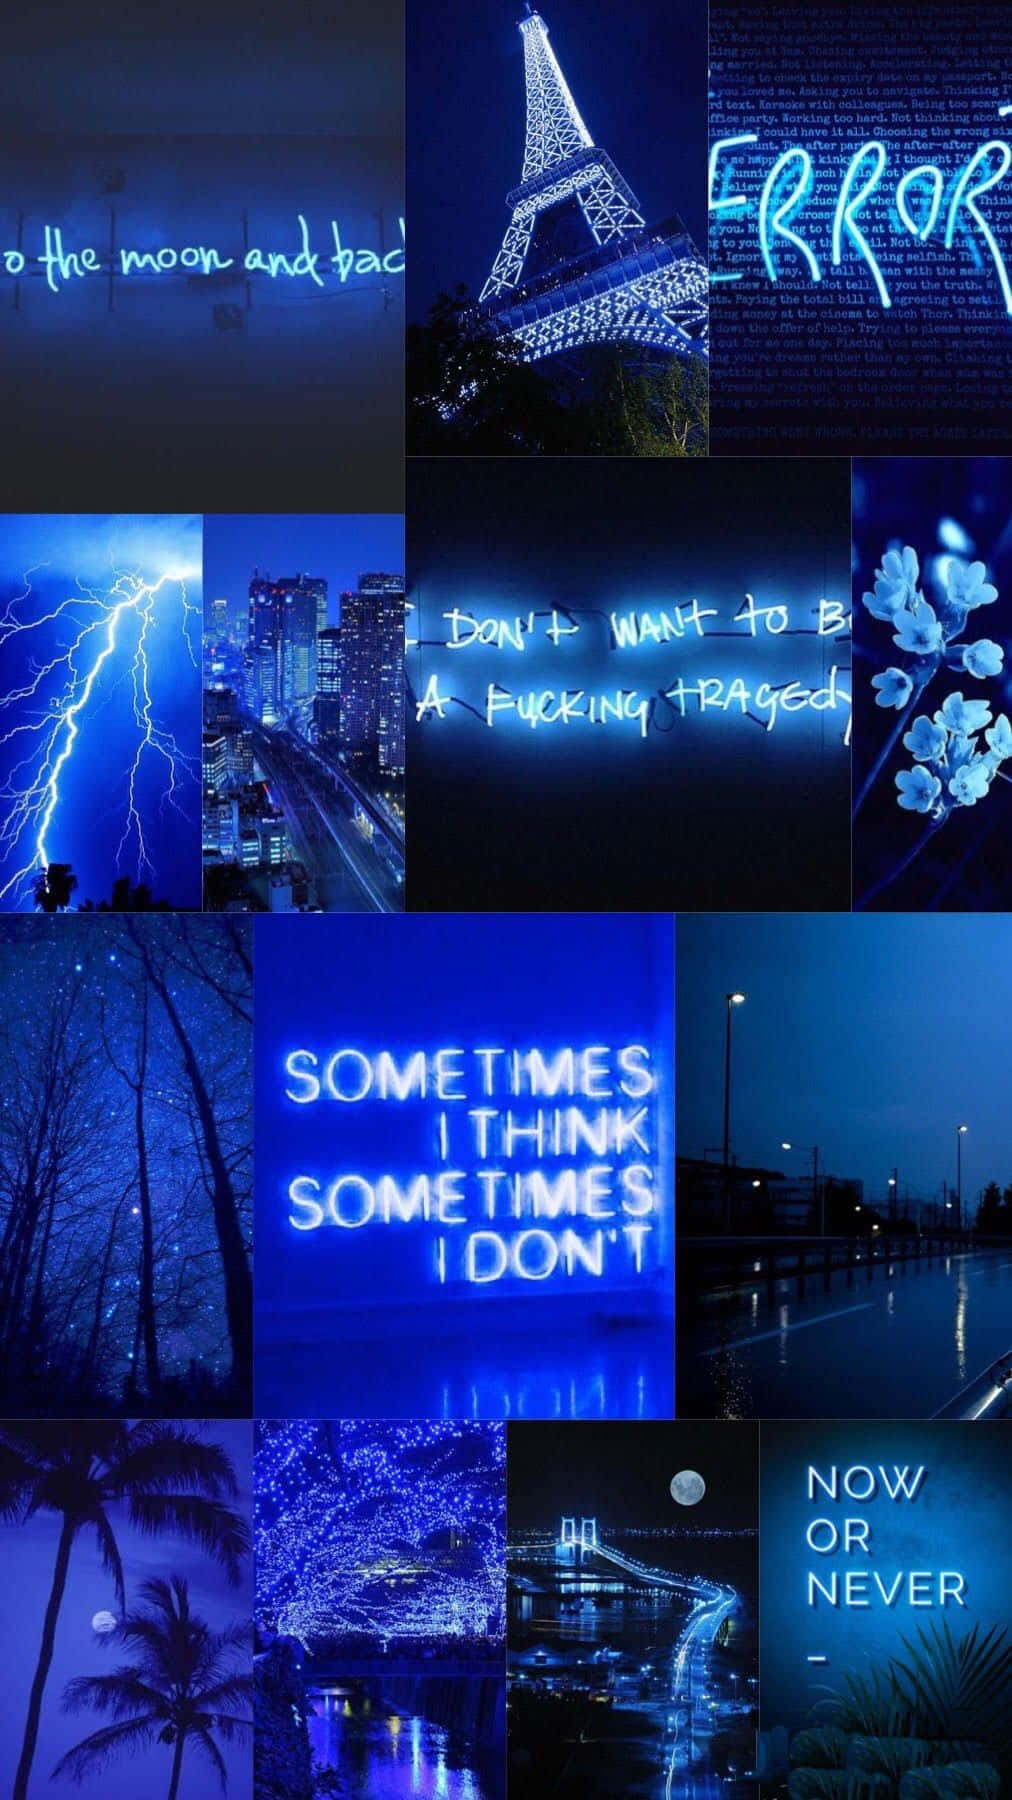 Electric Blue Collage Aesthetic.jpg Wallpaper